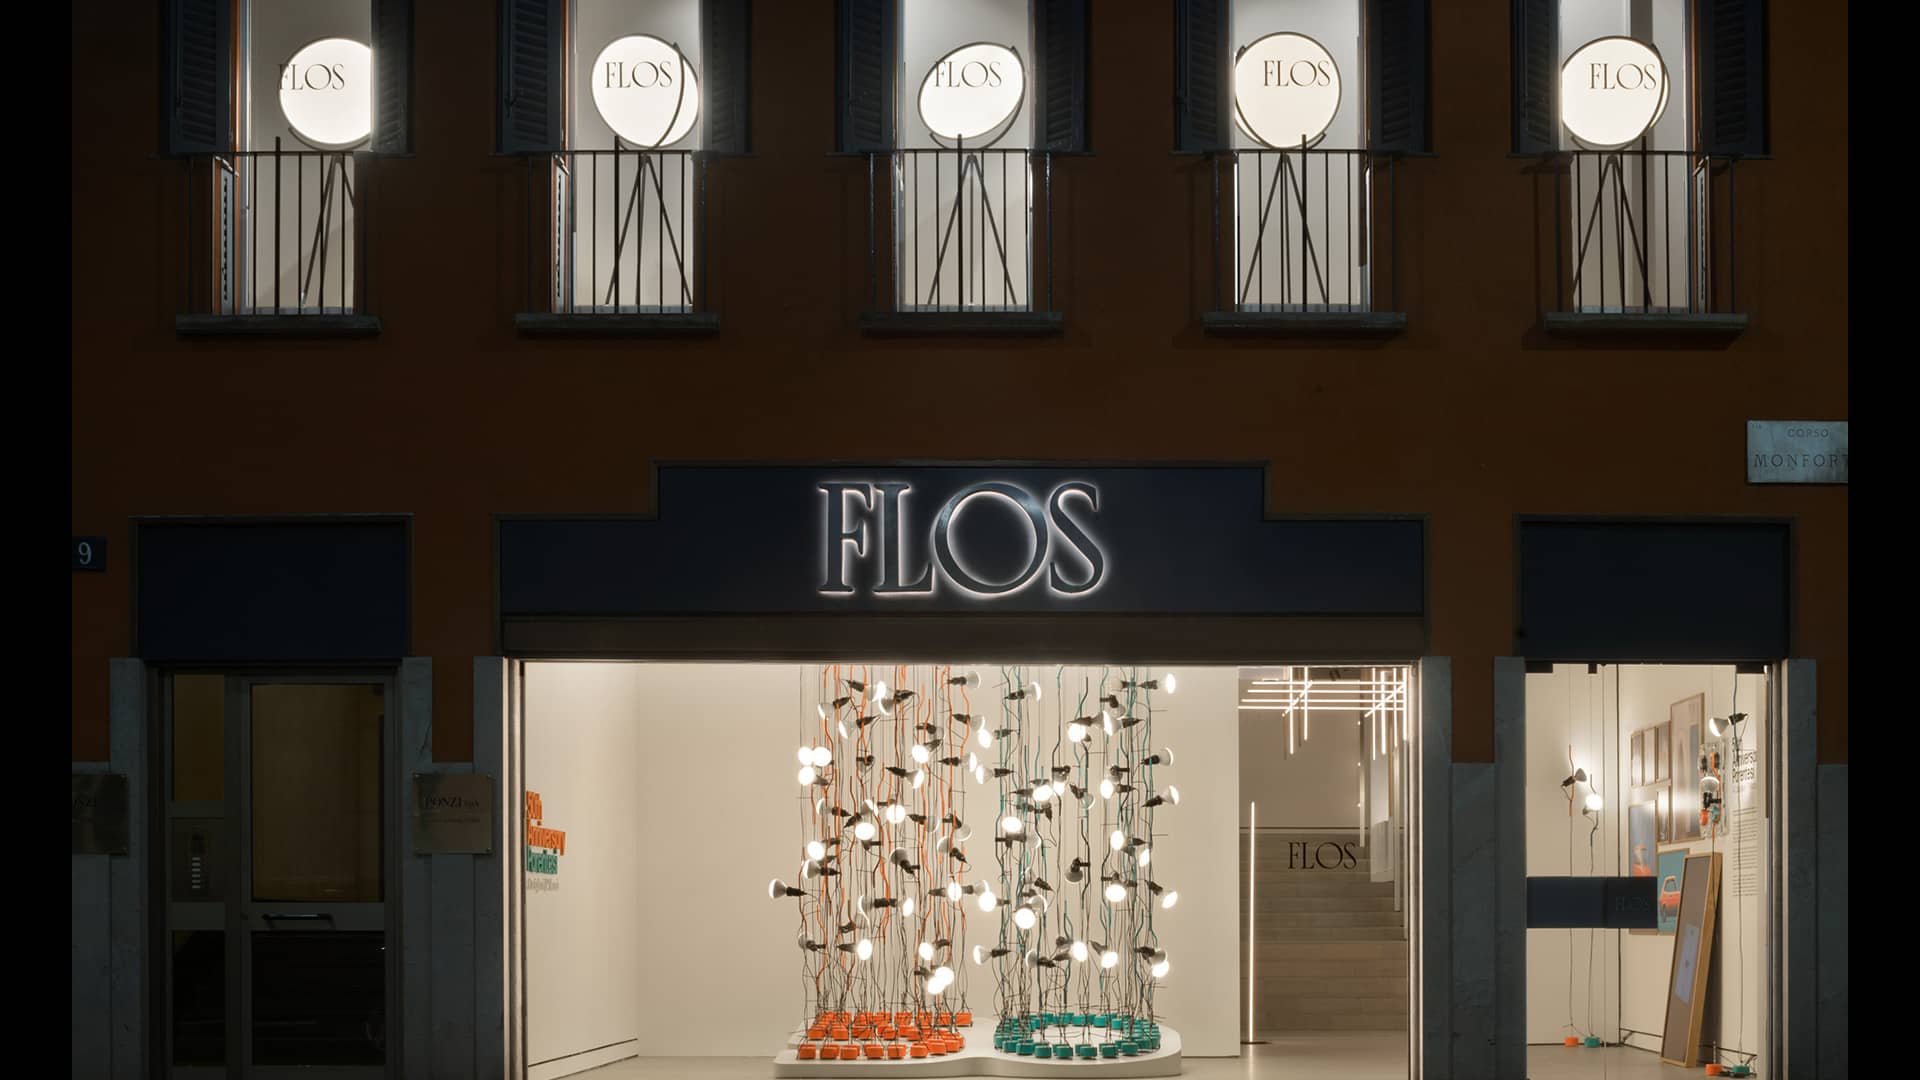 Flos packs a punch with its latest launch at Milan Design Week 2021